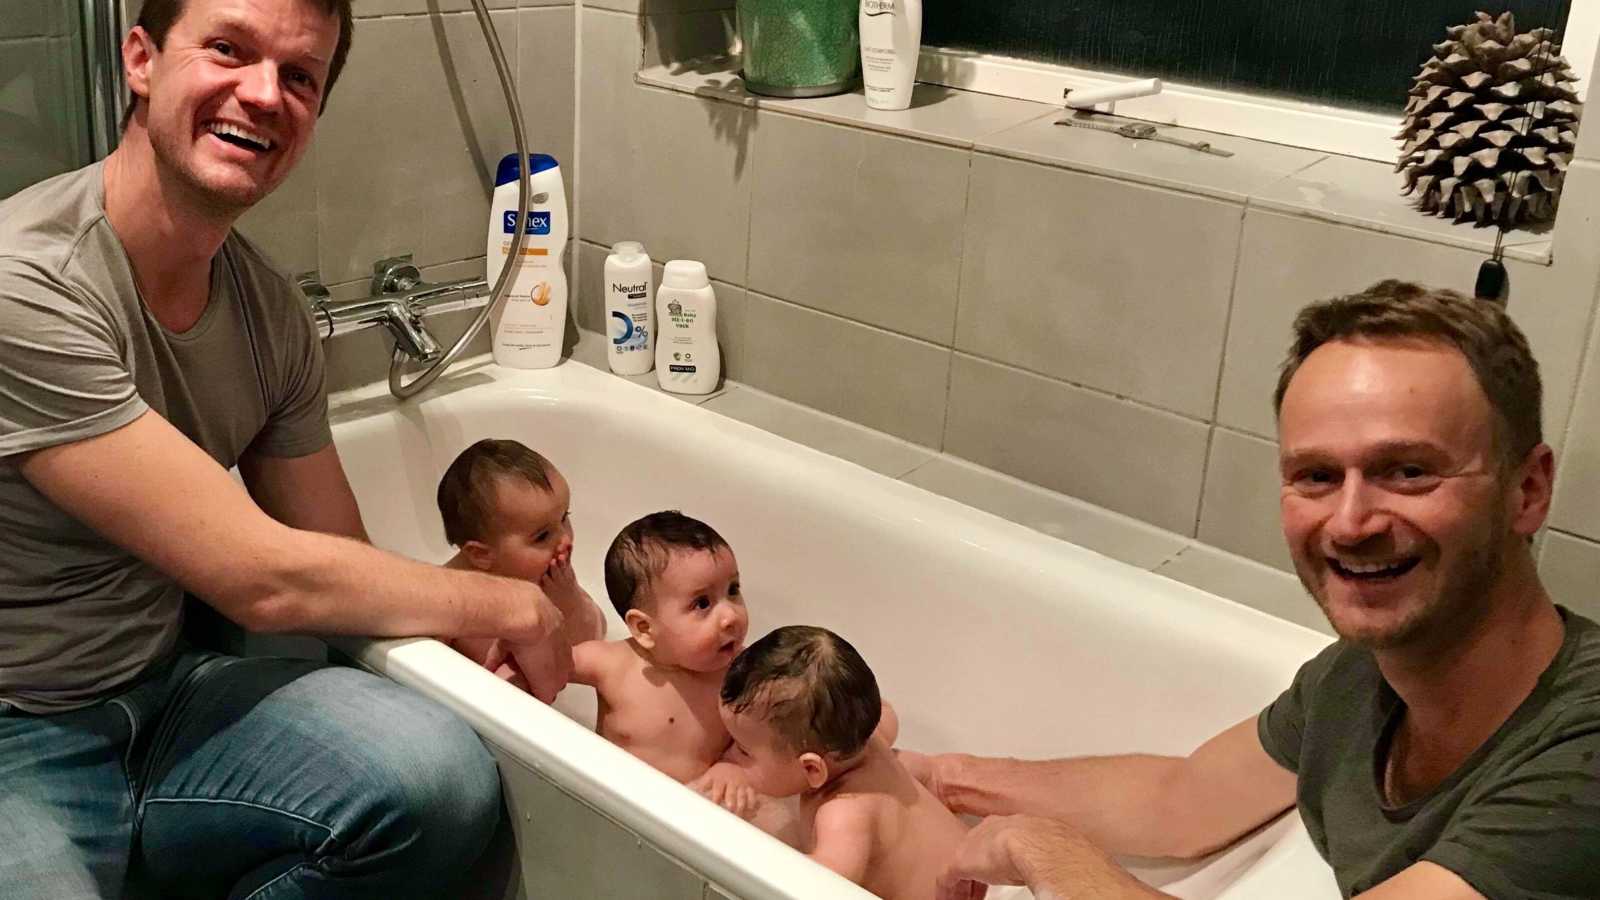 Fathers smile as they give their triplets a bath